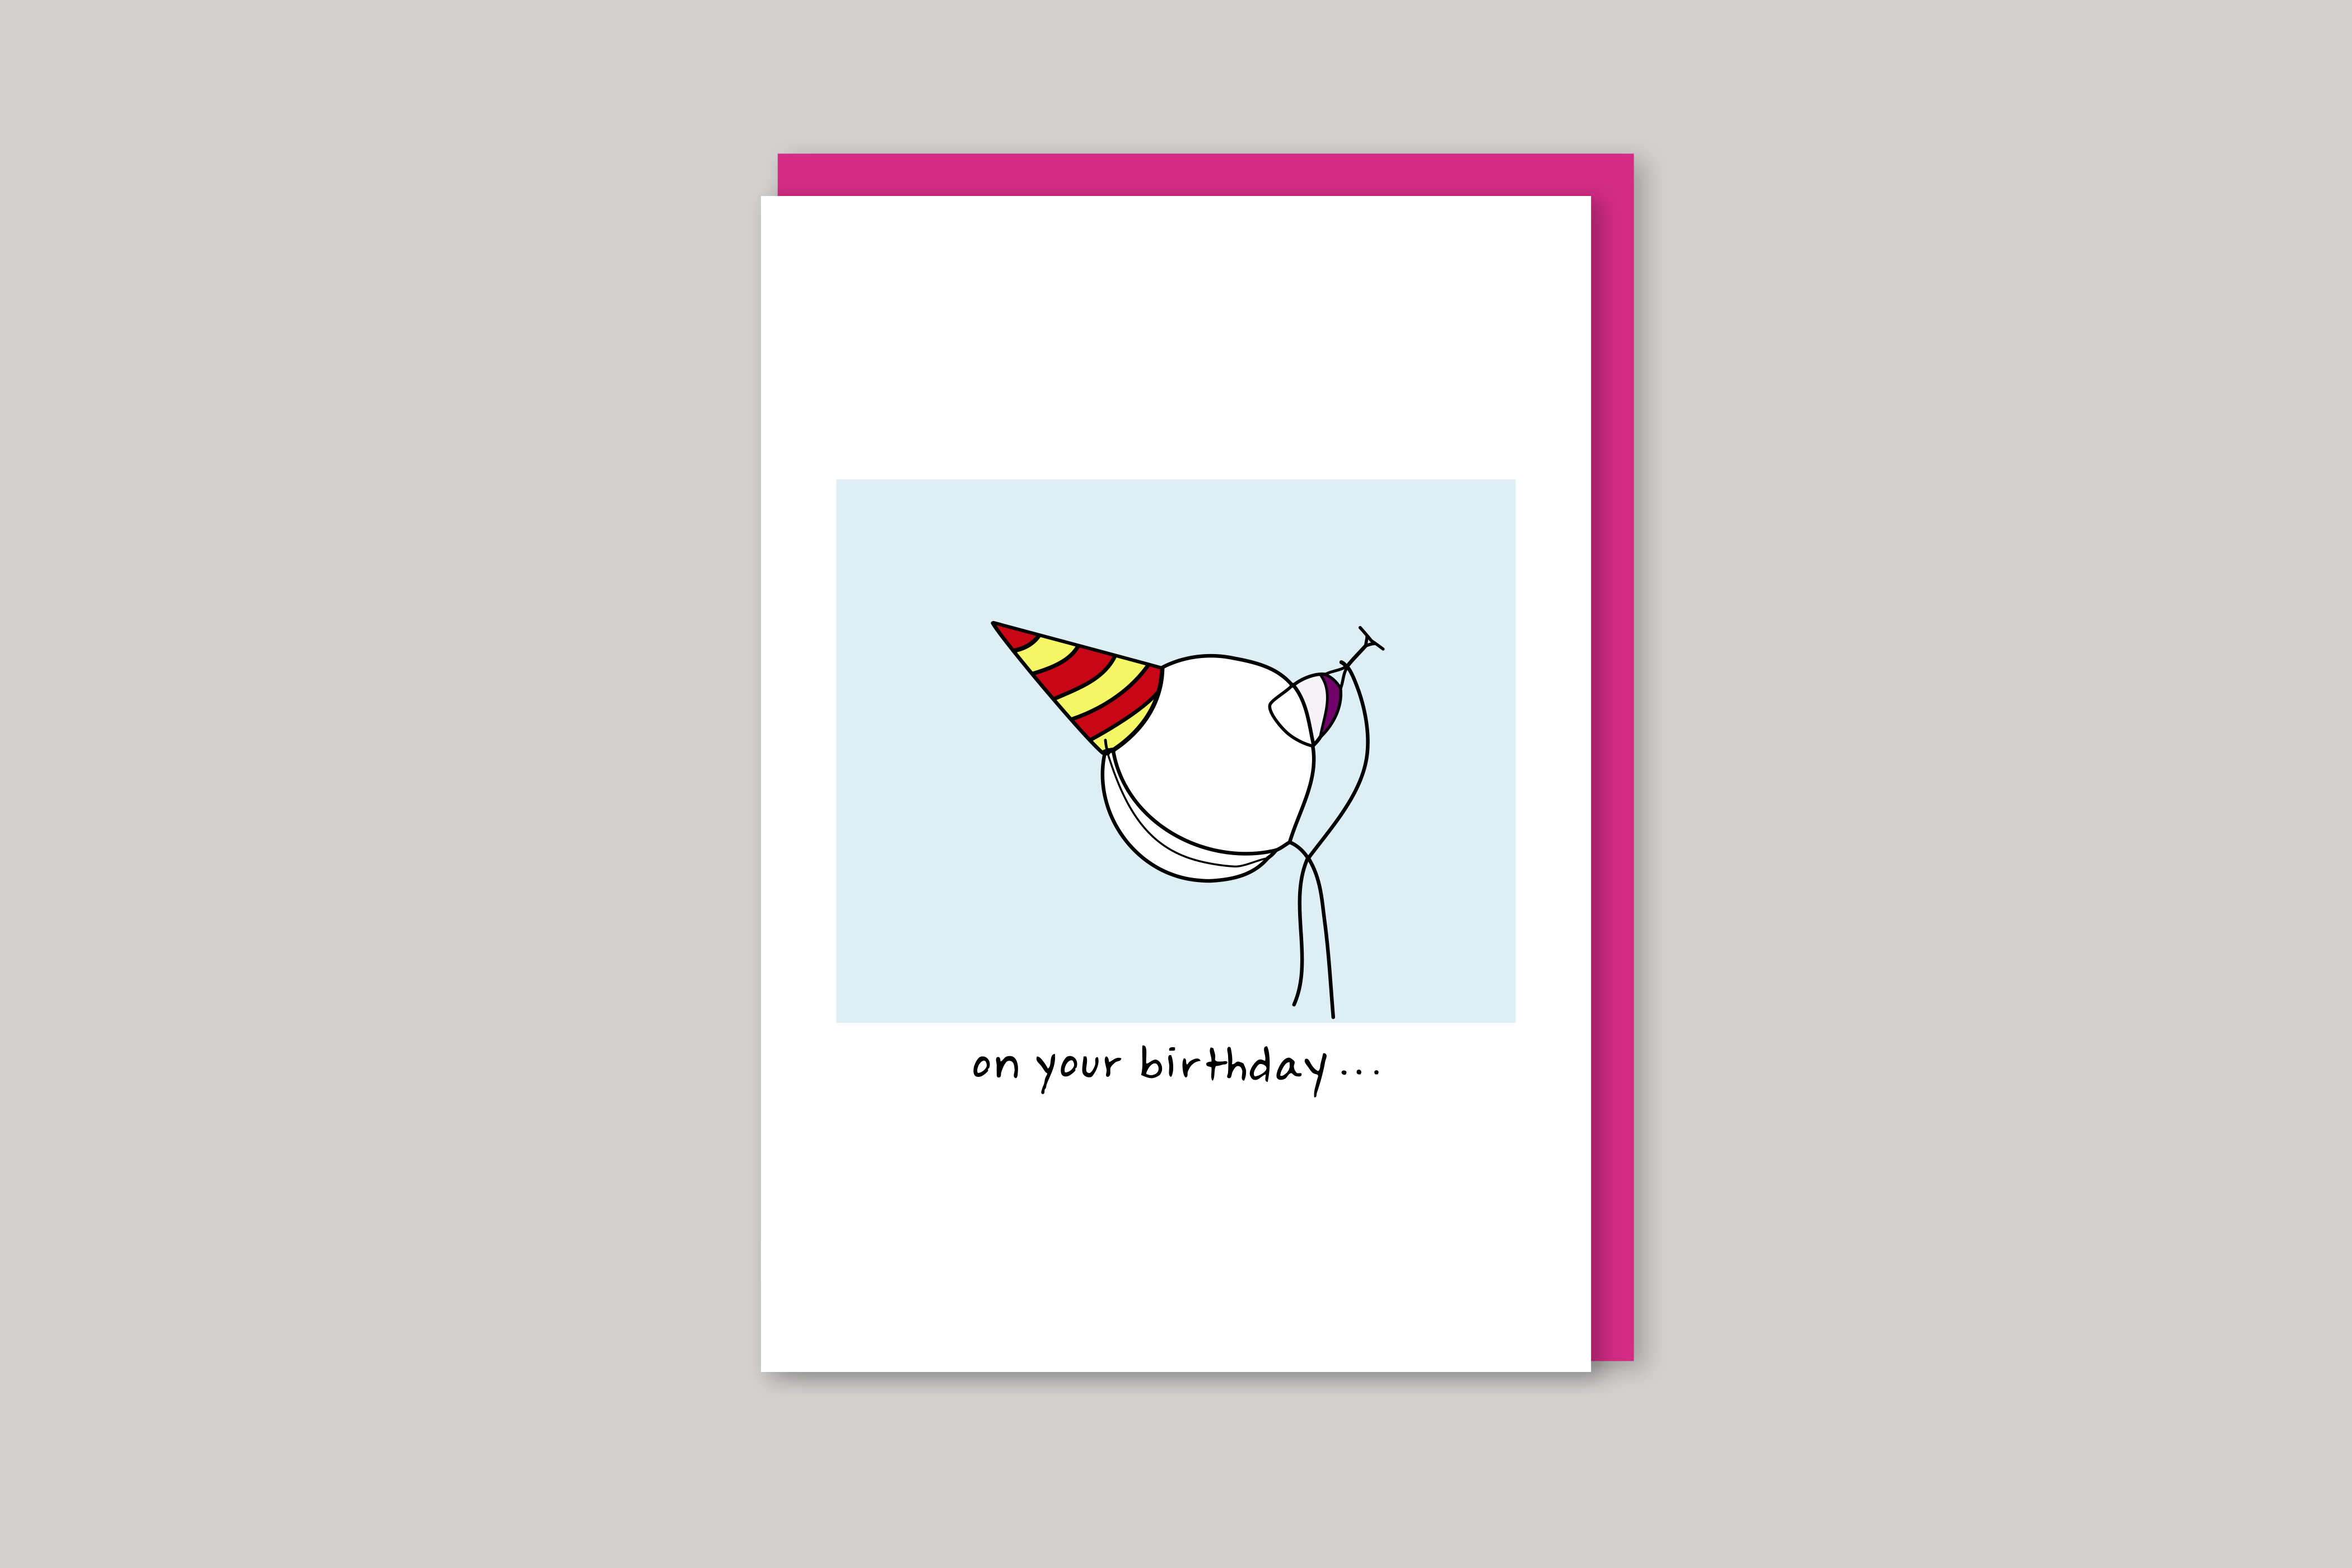 Boozy Birthday humorous illustration from Mean Cards range of greeting cards by Icon, back page.